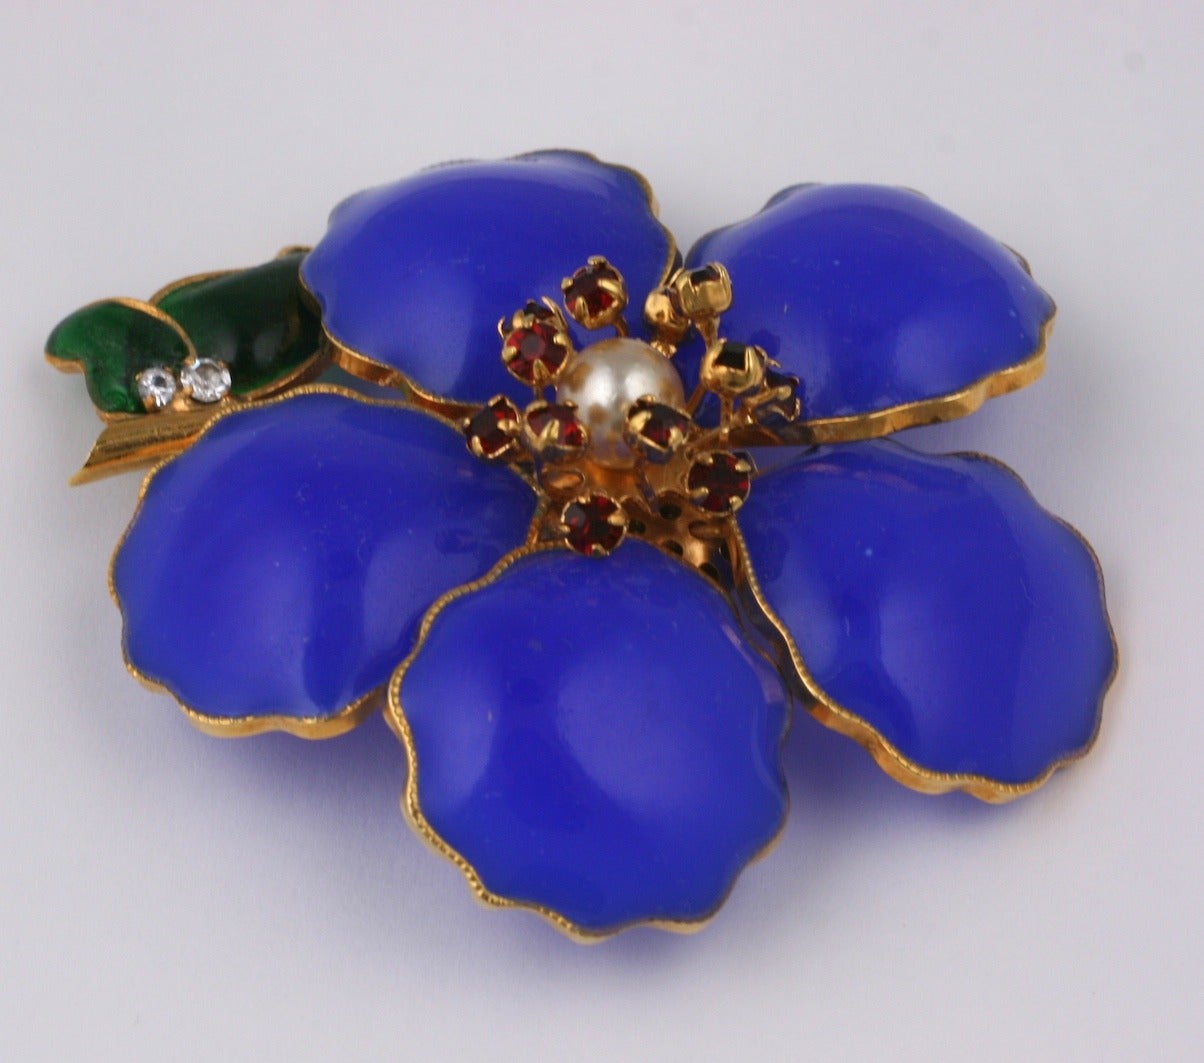 Chanel's poured glass  Camelia  brooch circa 1960's by Maison Gripoix. Bright lapis blue poured glass emamel petals with faux pearl, ruby strass center and emerald green glass leaves.
3 x 2.5